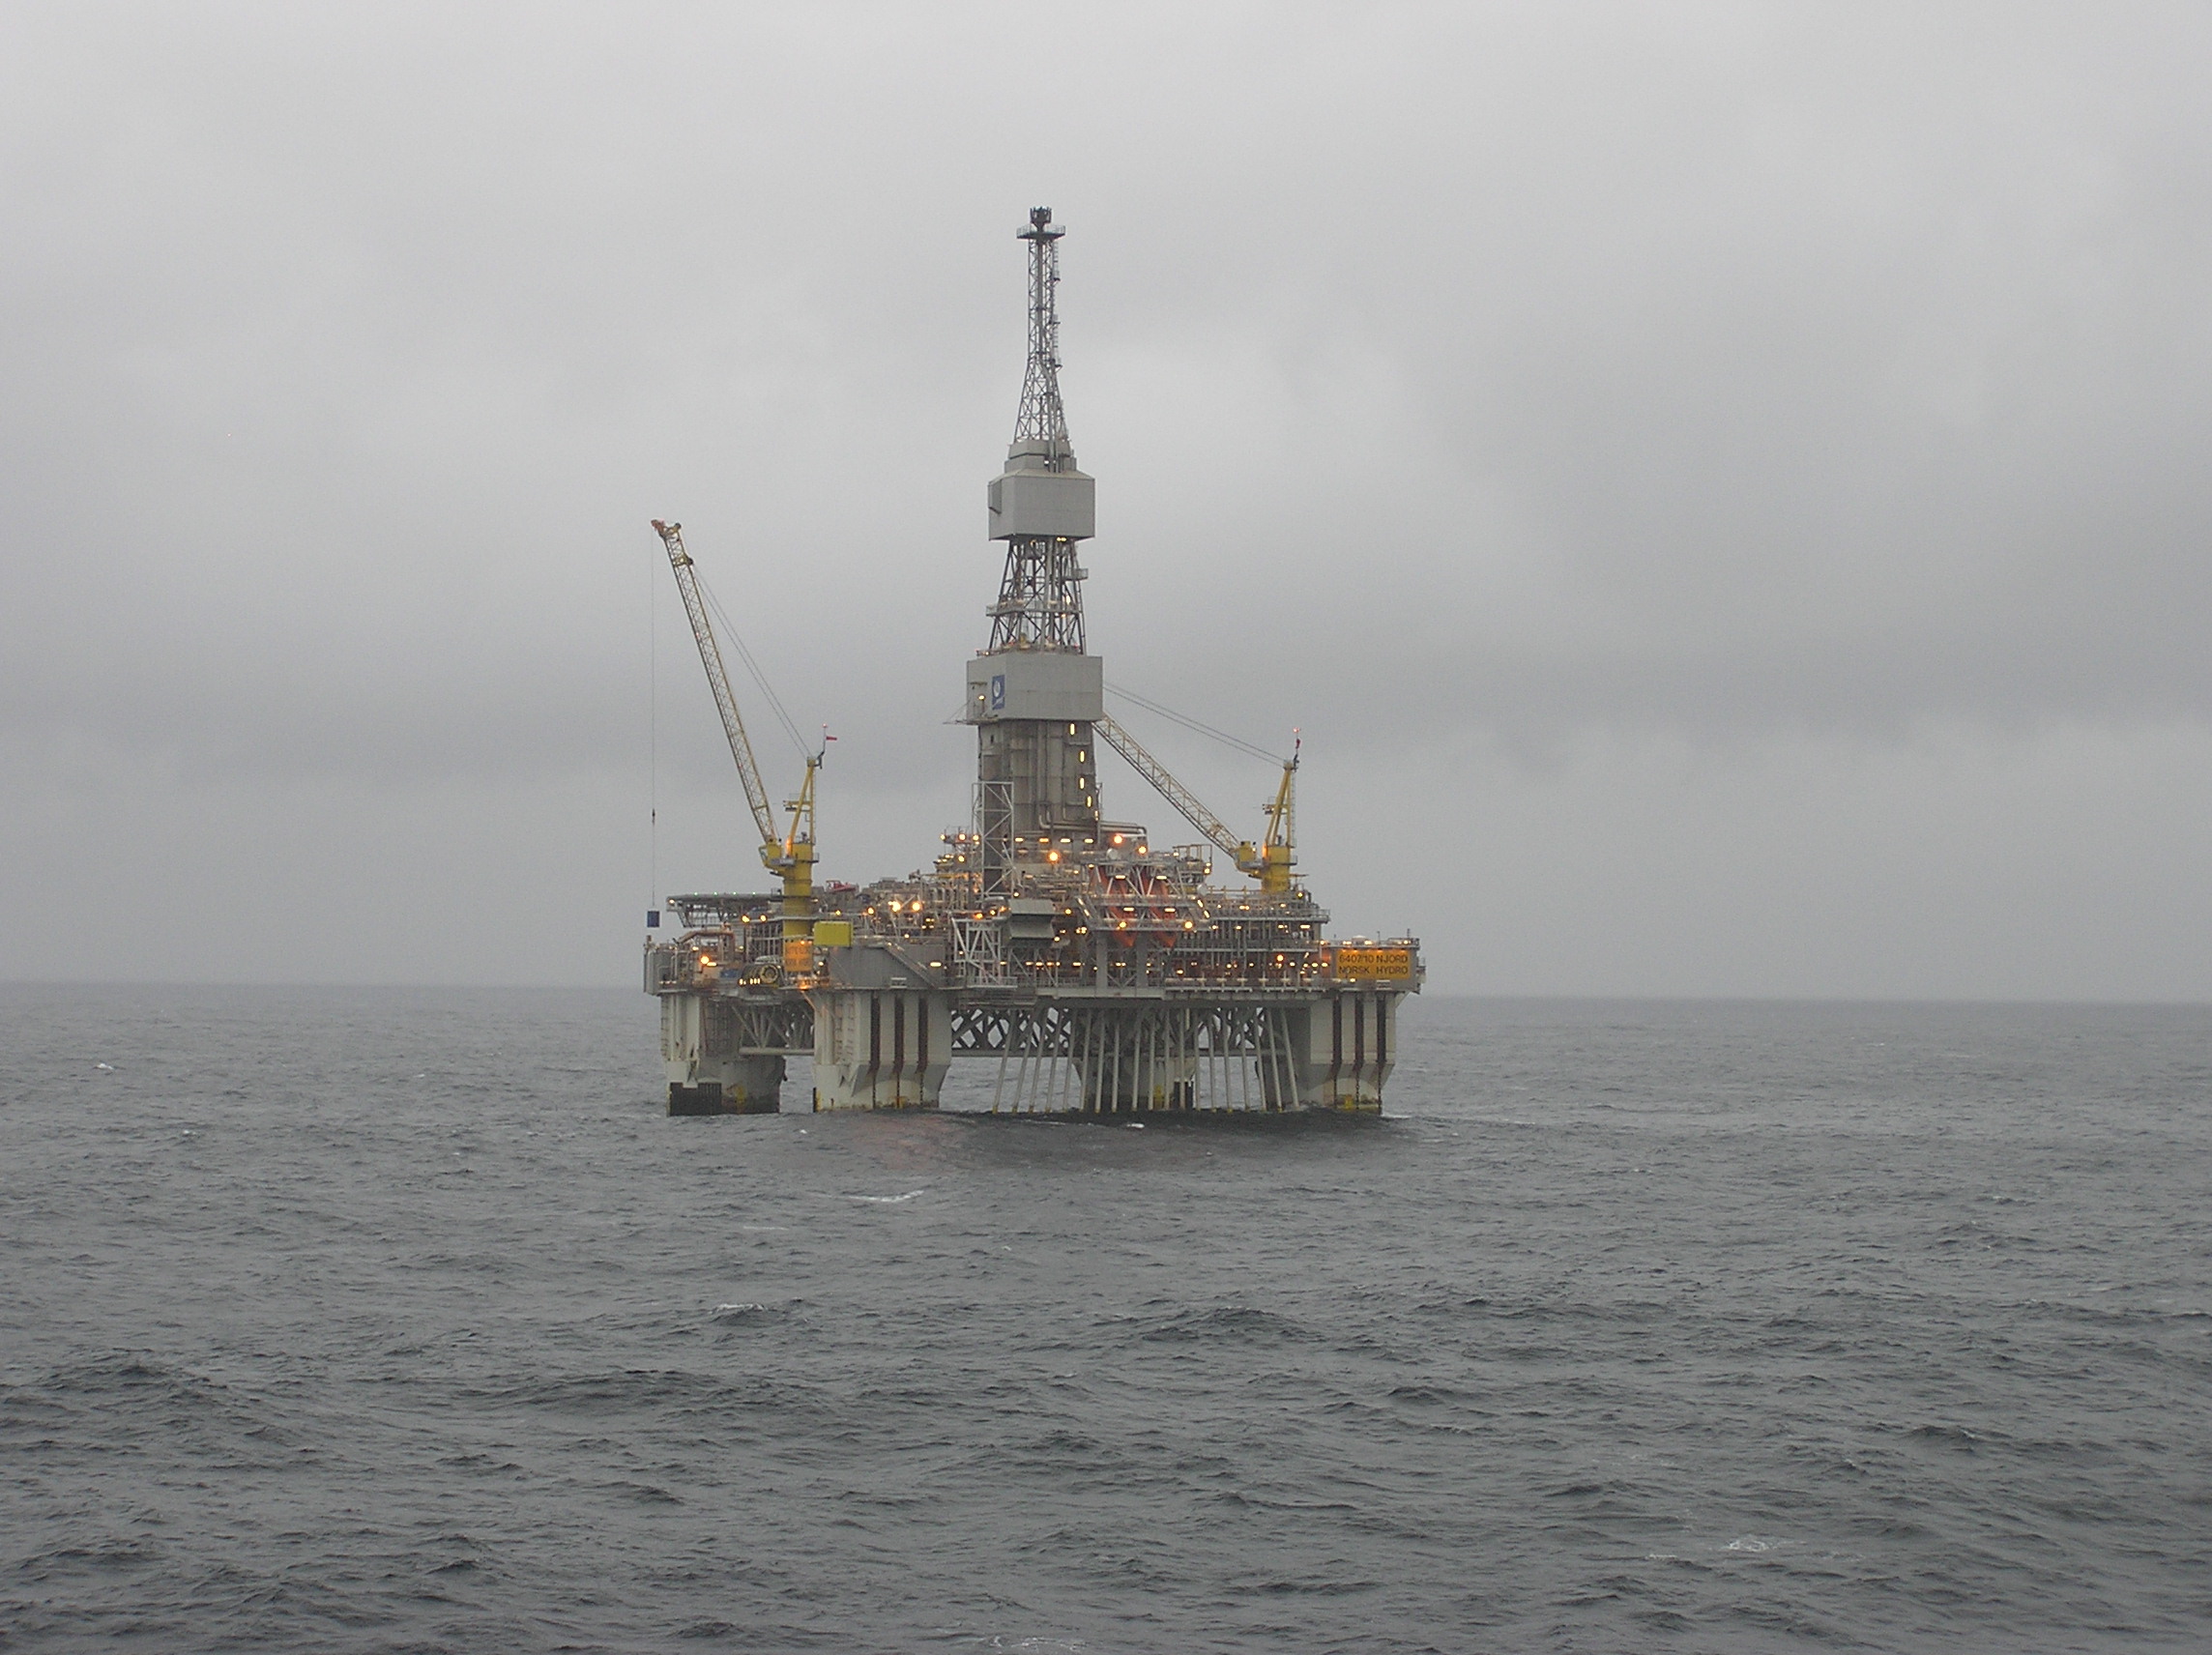 offshore oil & gas segment recovering